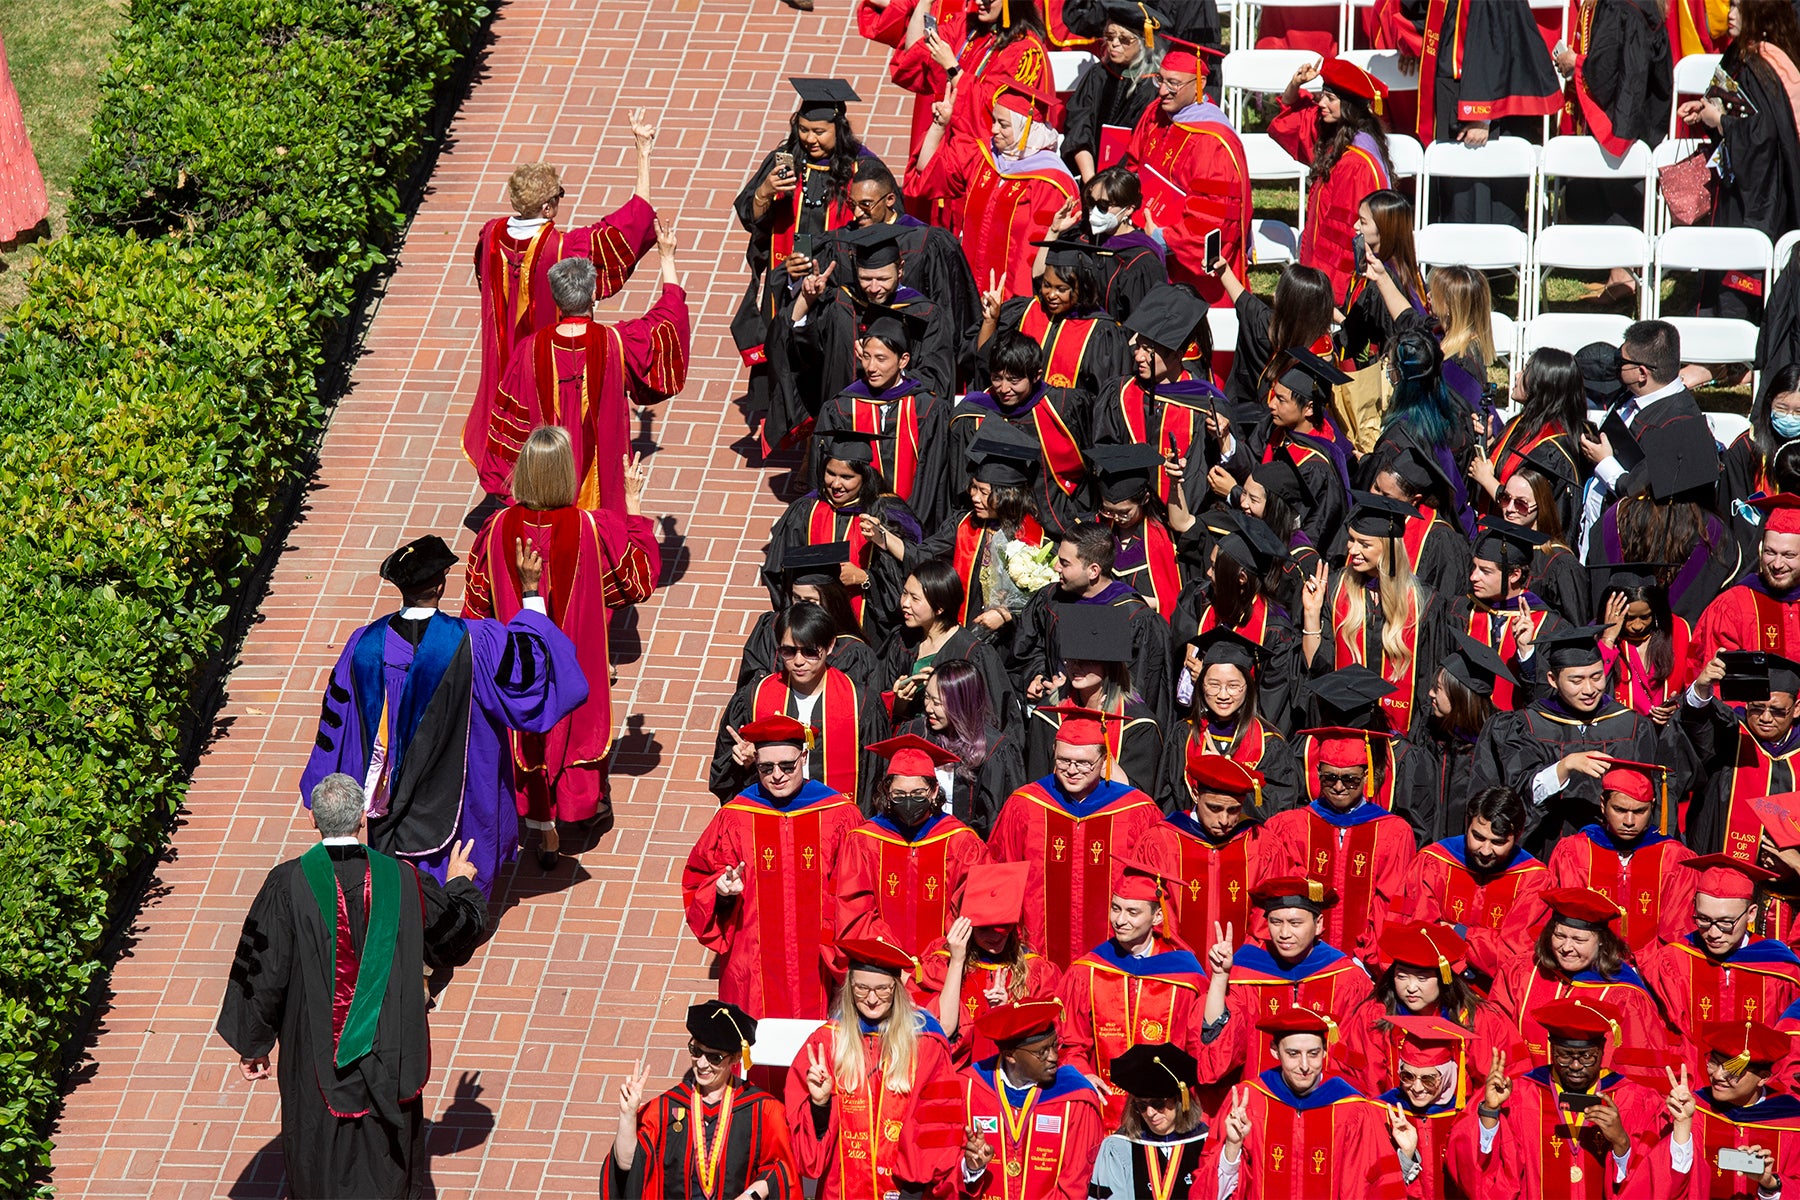 USC 2022 commencement: End of the event